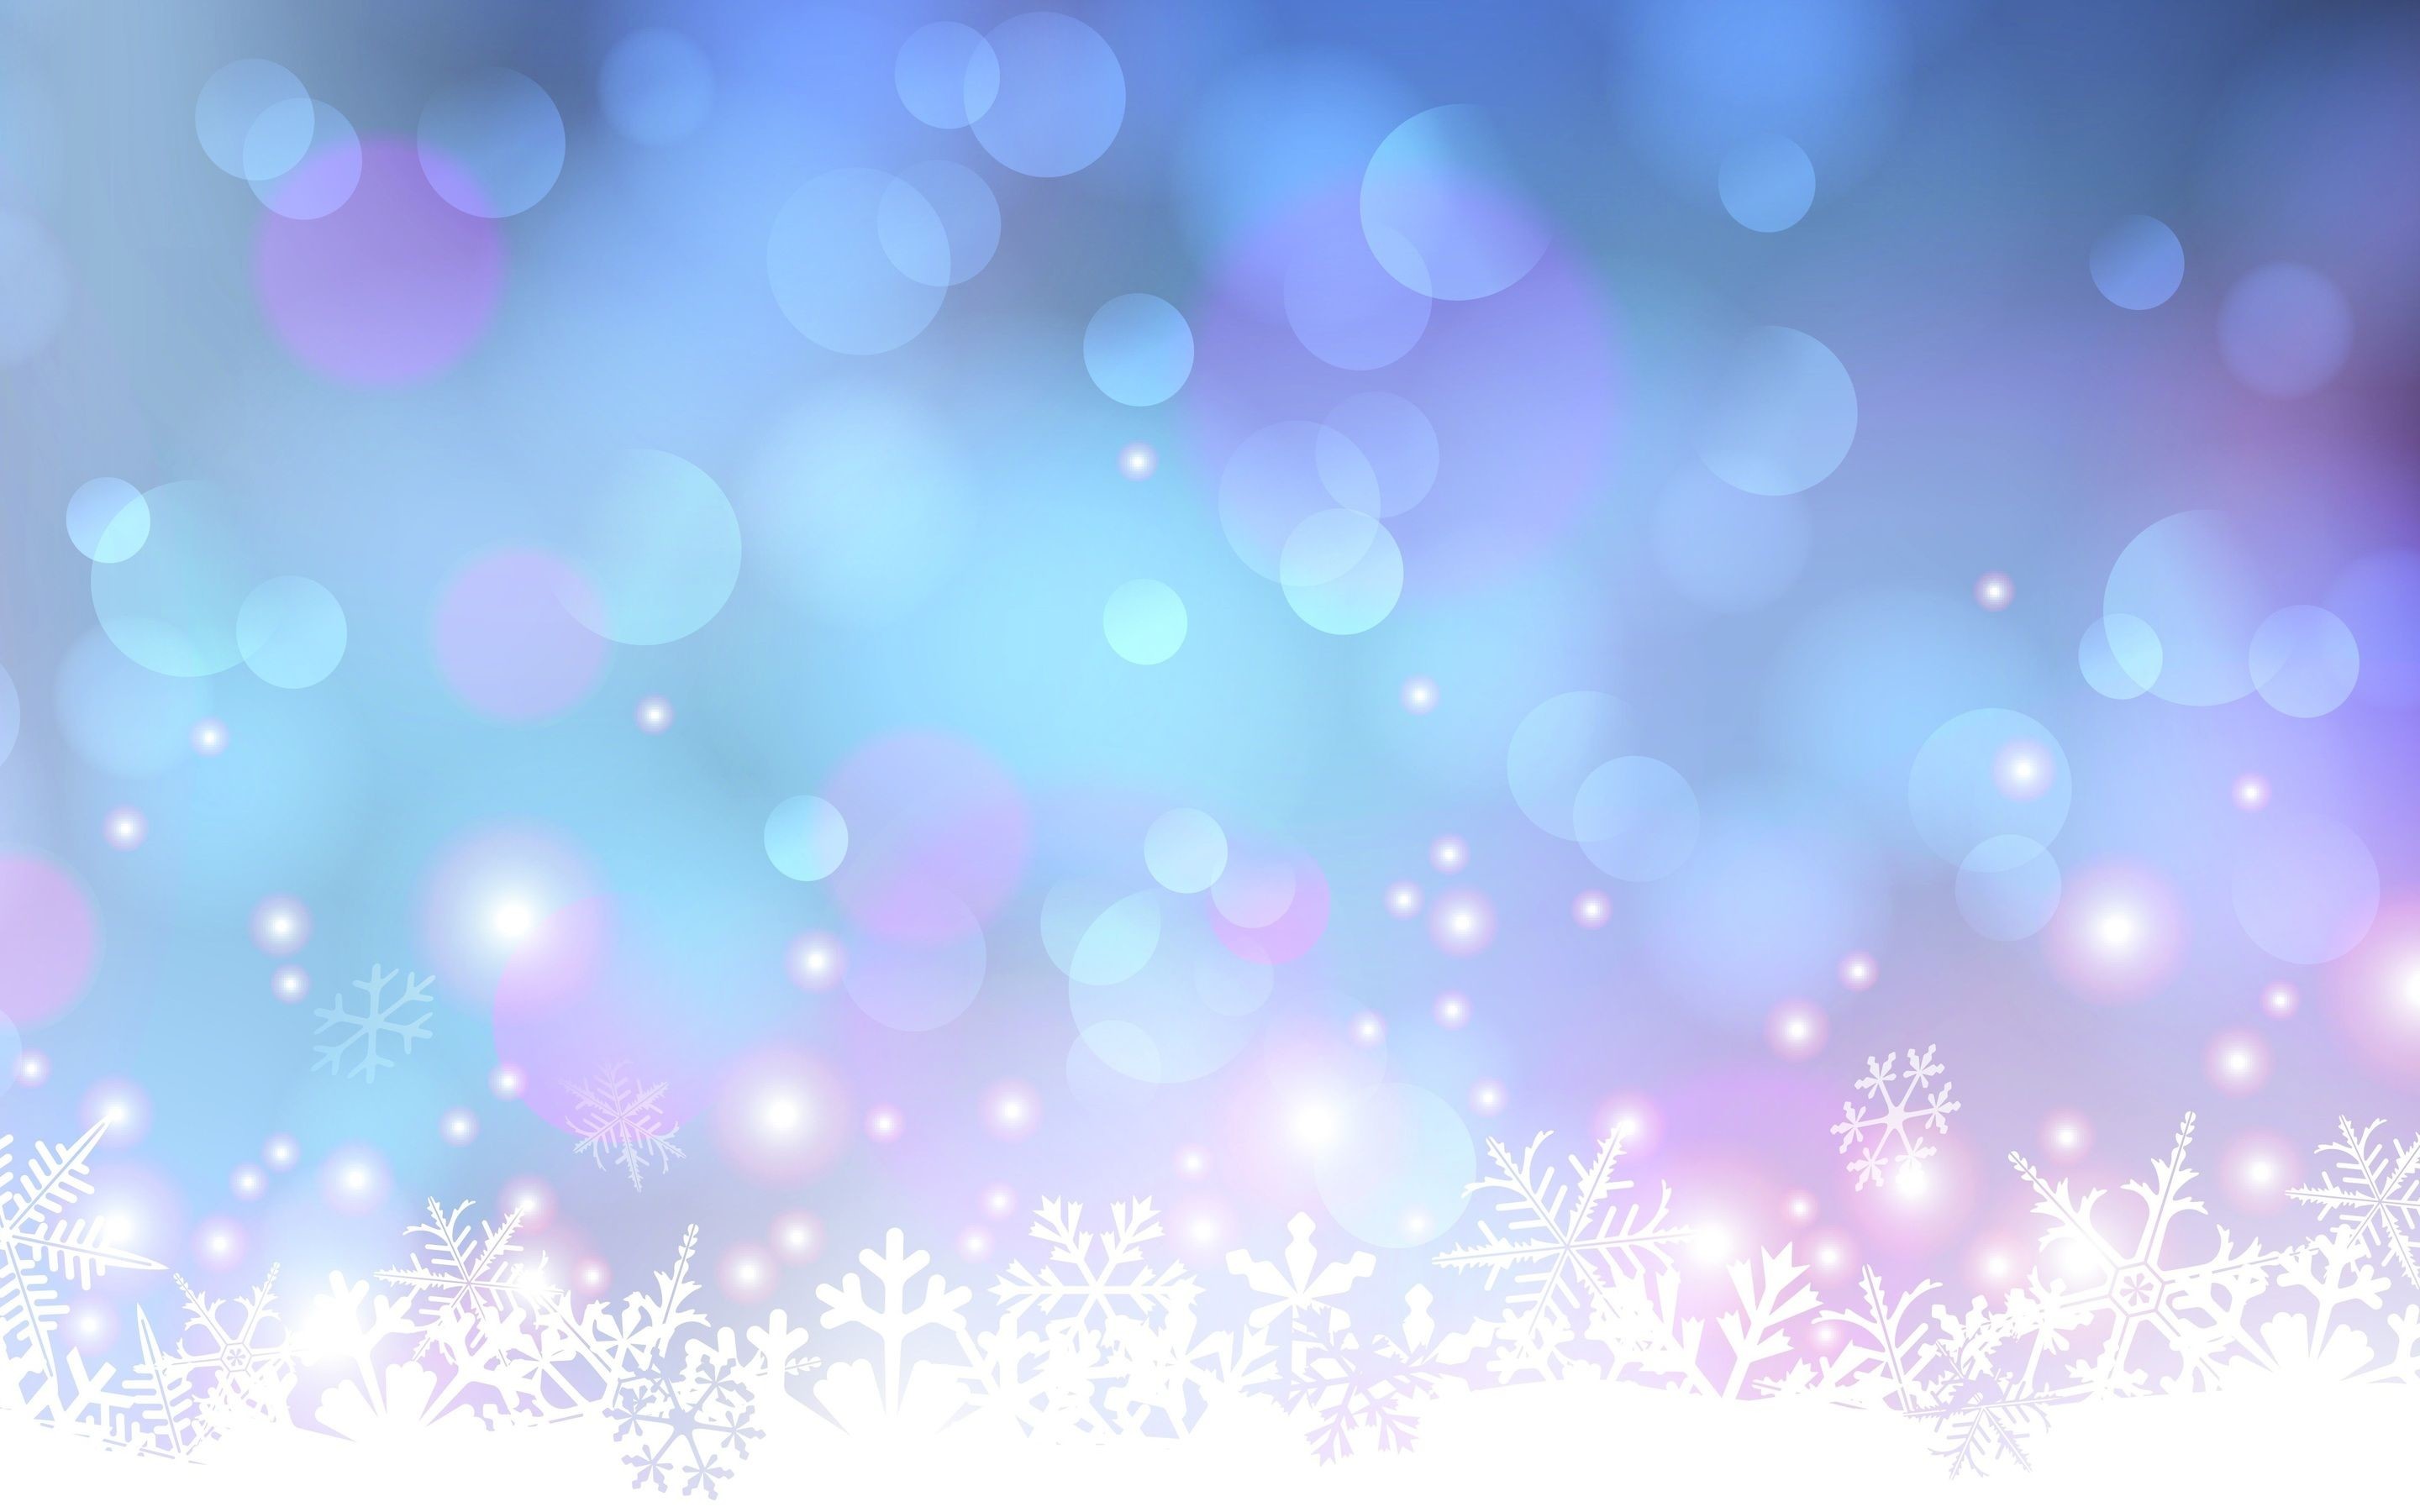 2880x1800 Christmas backgrounds - wallpapers, photos, pictures, images |